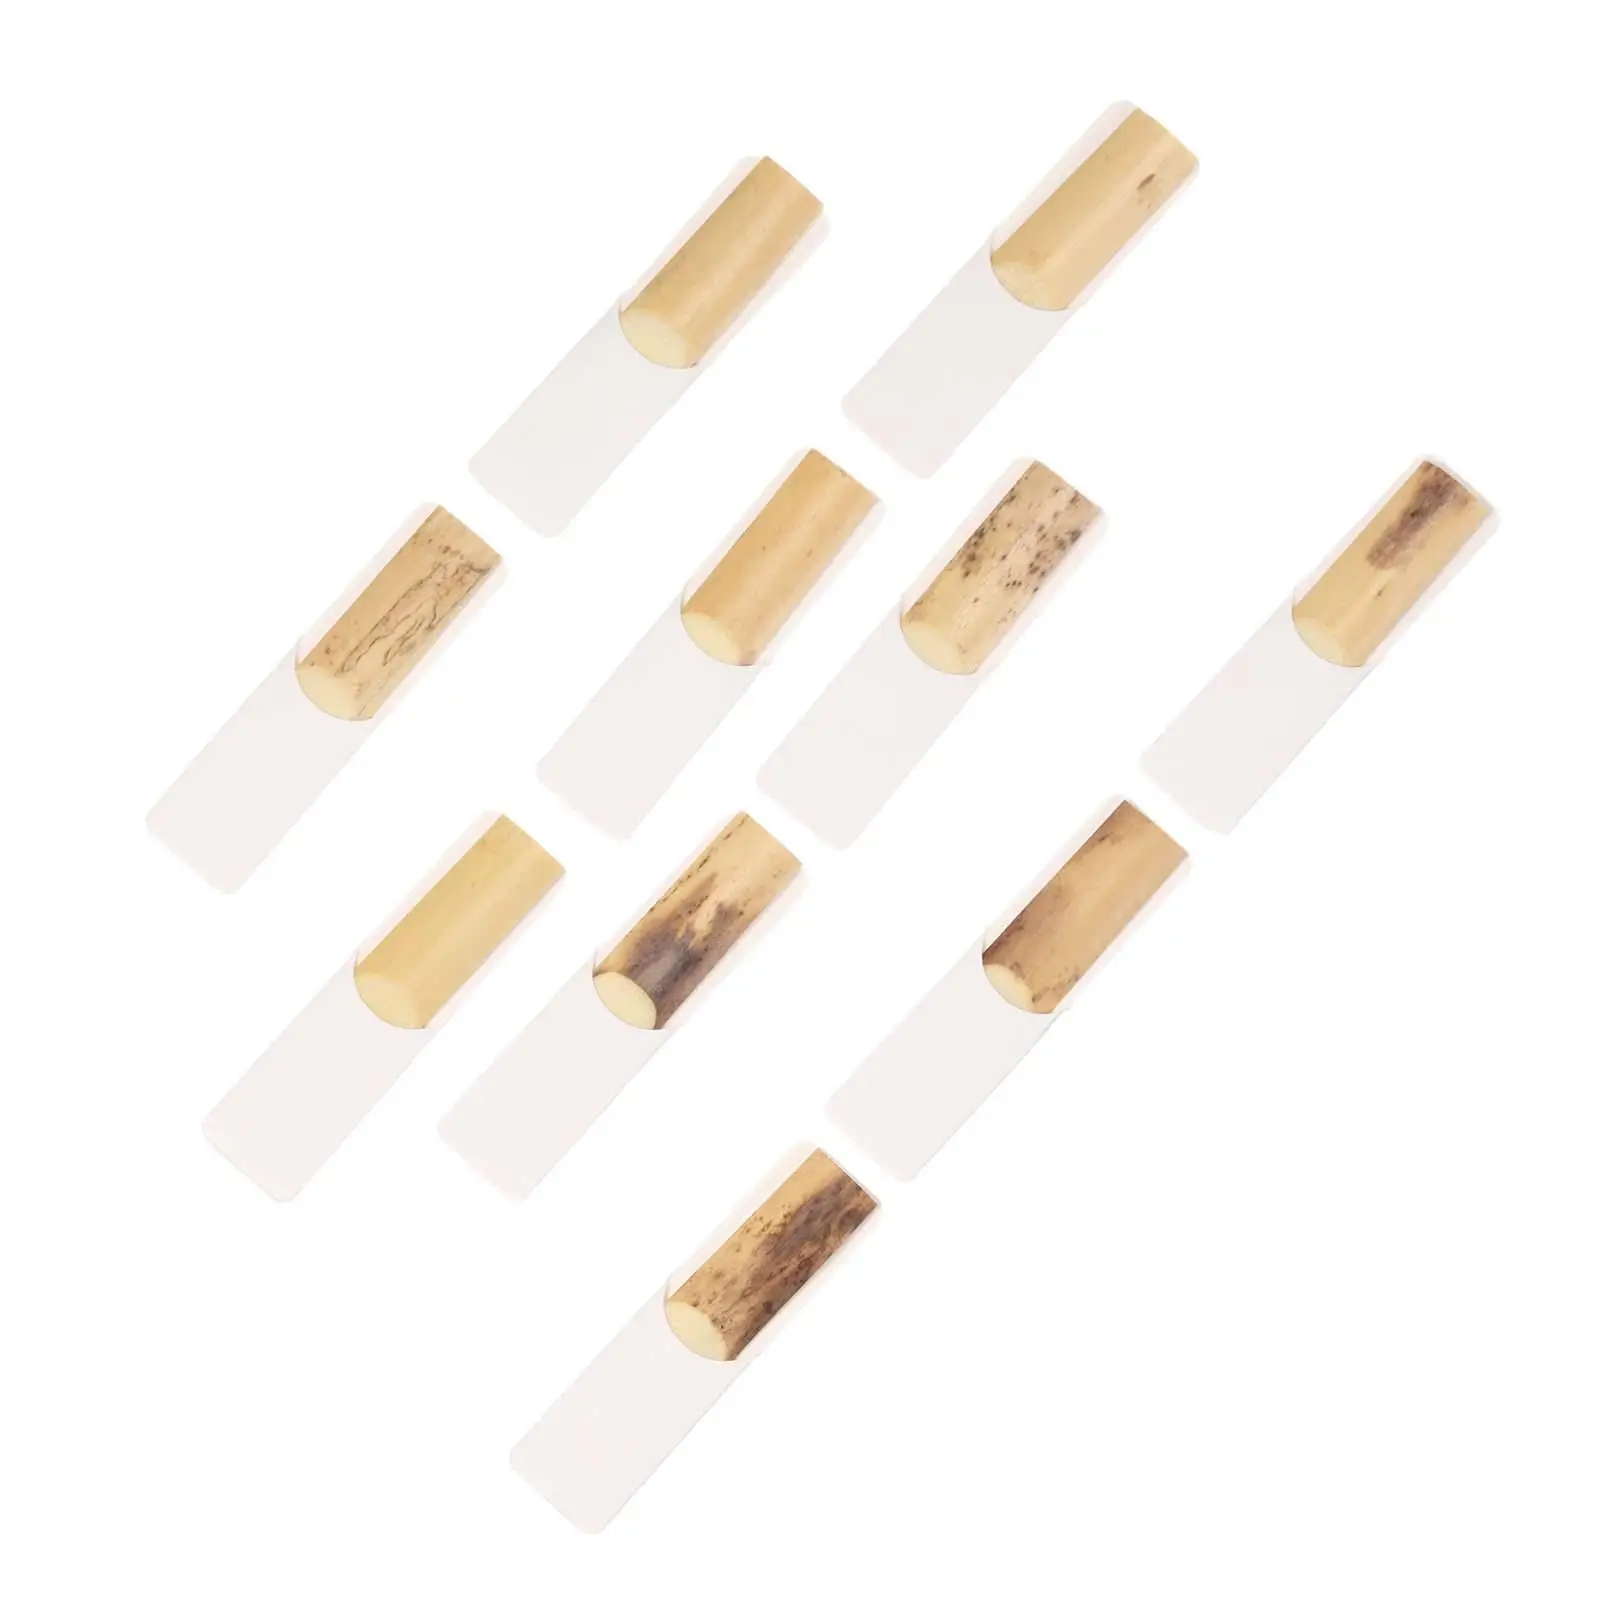 10Pcs Alto Saxophone Reeds Clear Sound 2.5 Professional Traditional Reeds Parts Replaces for Wind Instrument